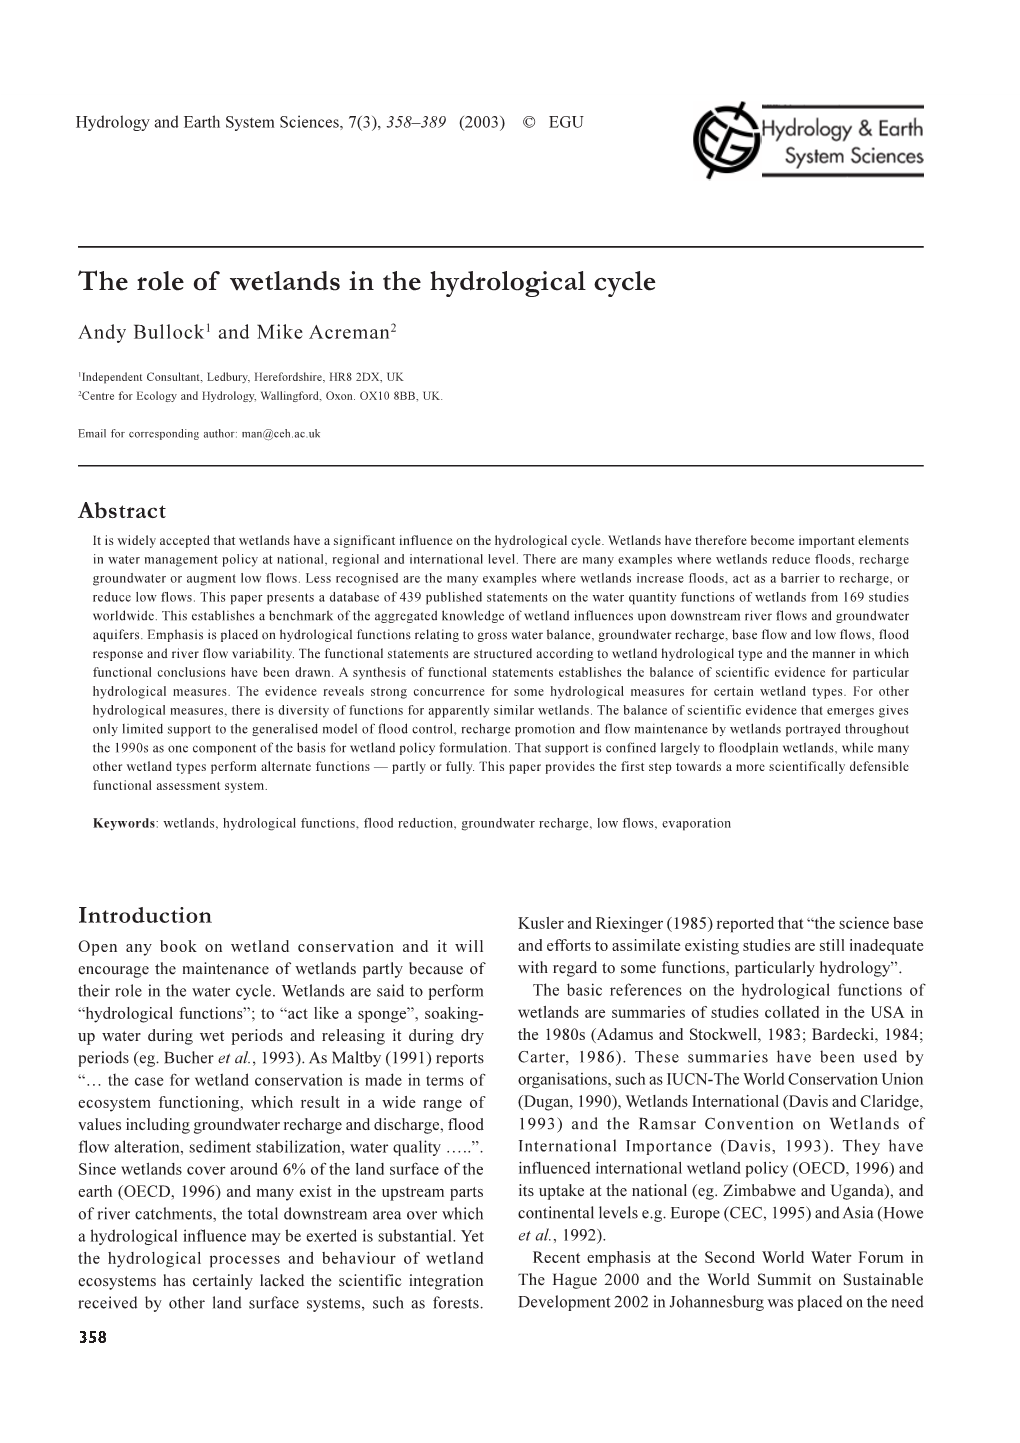 The Role of Wetlands in the Hydrological Cycle